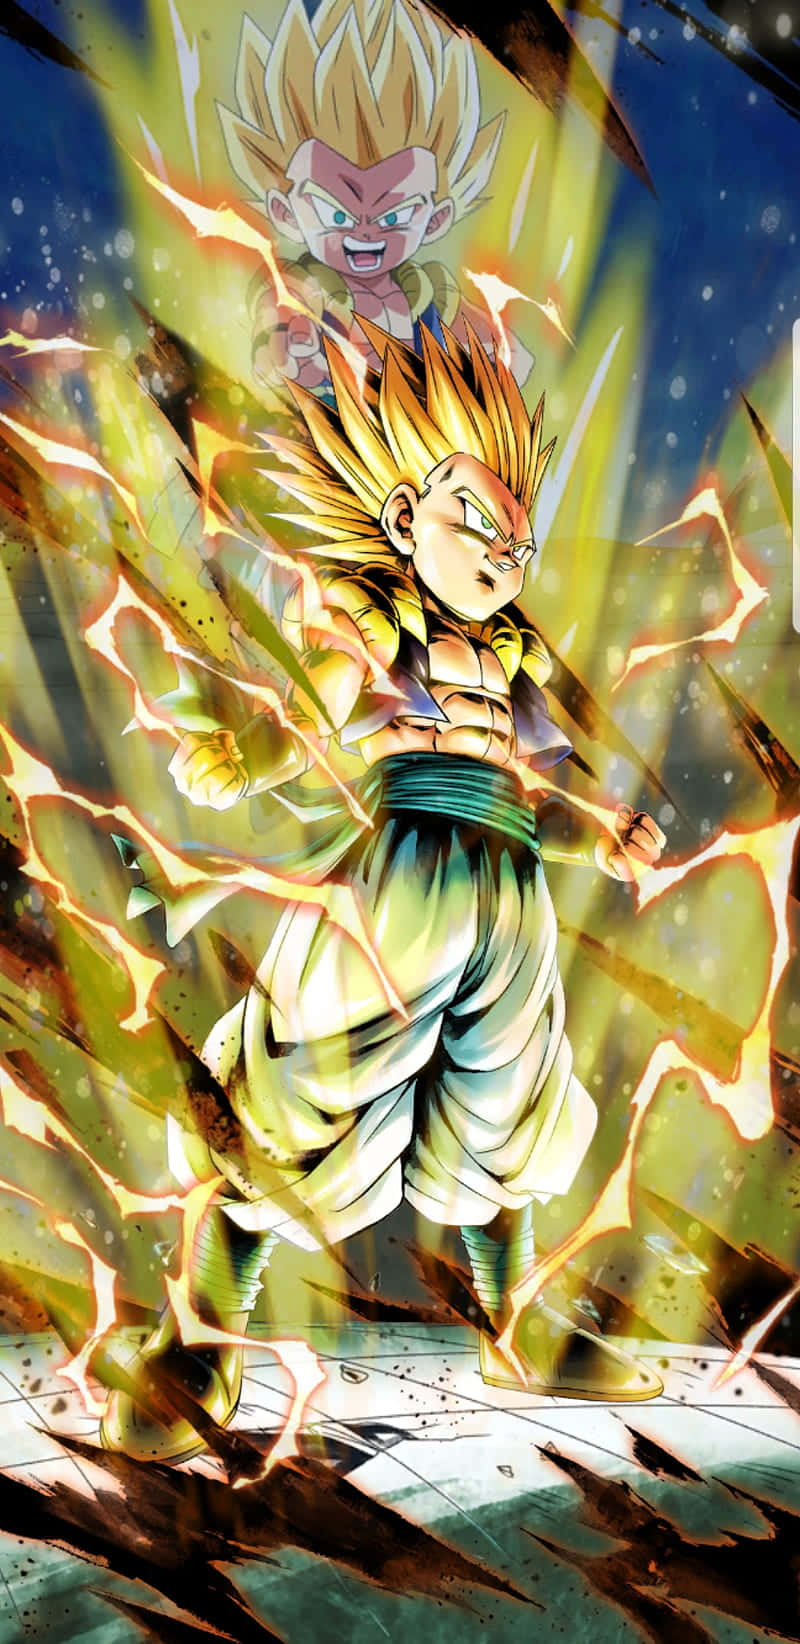 Making Calls On The Go With Trunks Phone Wallpaper